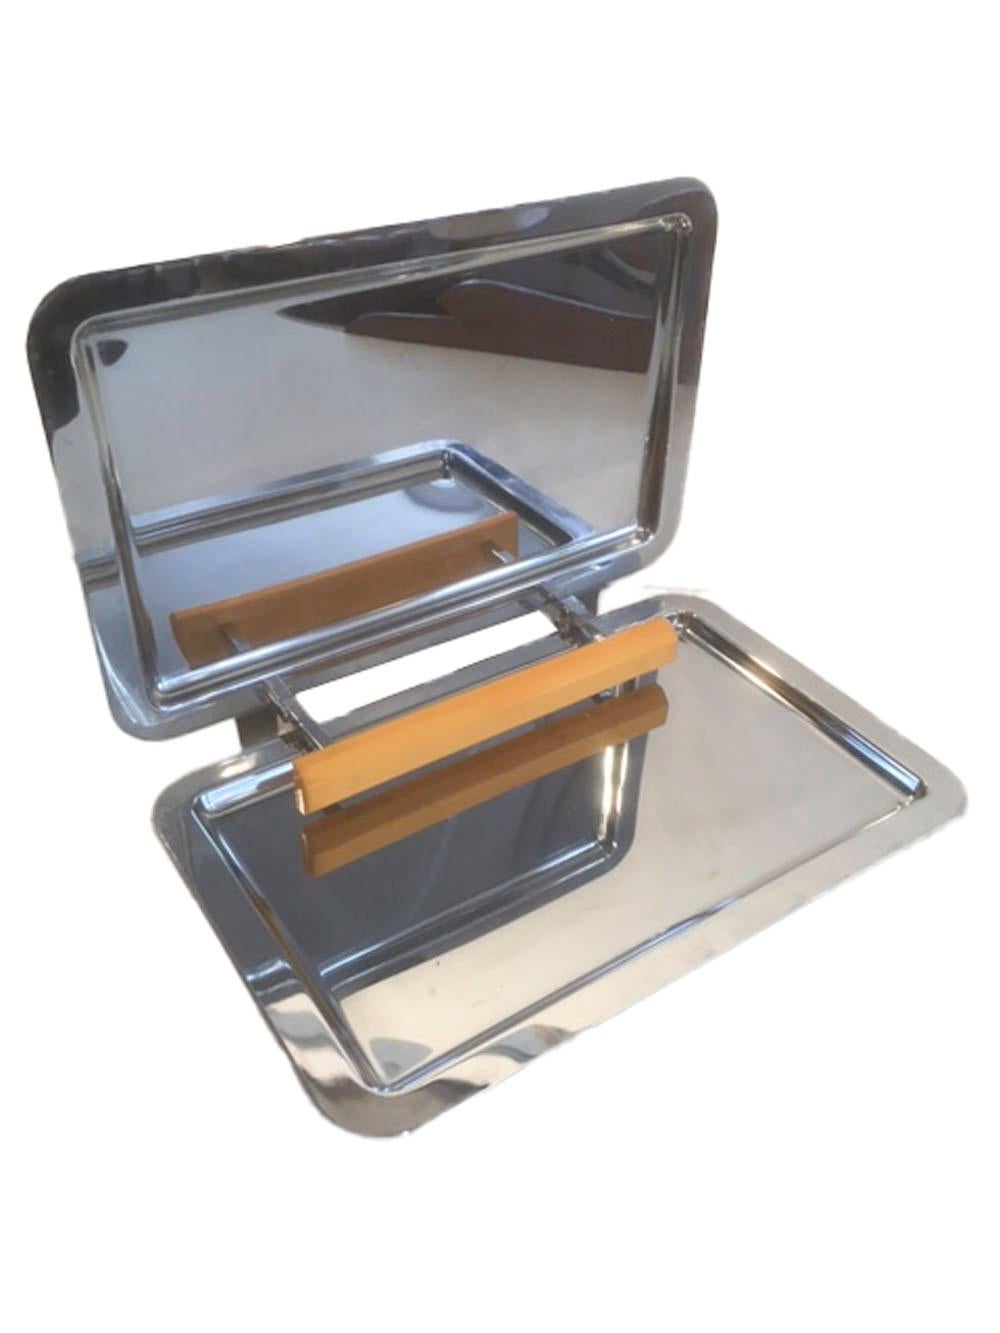 Manning-Bowman chrome folding tray with yellow Bakelite handle, the two rectangular halves with a flat rim around a central surface with a central Bakelite handle connected at the hinge. The tray folds like a clamshell enclosing the handle for